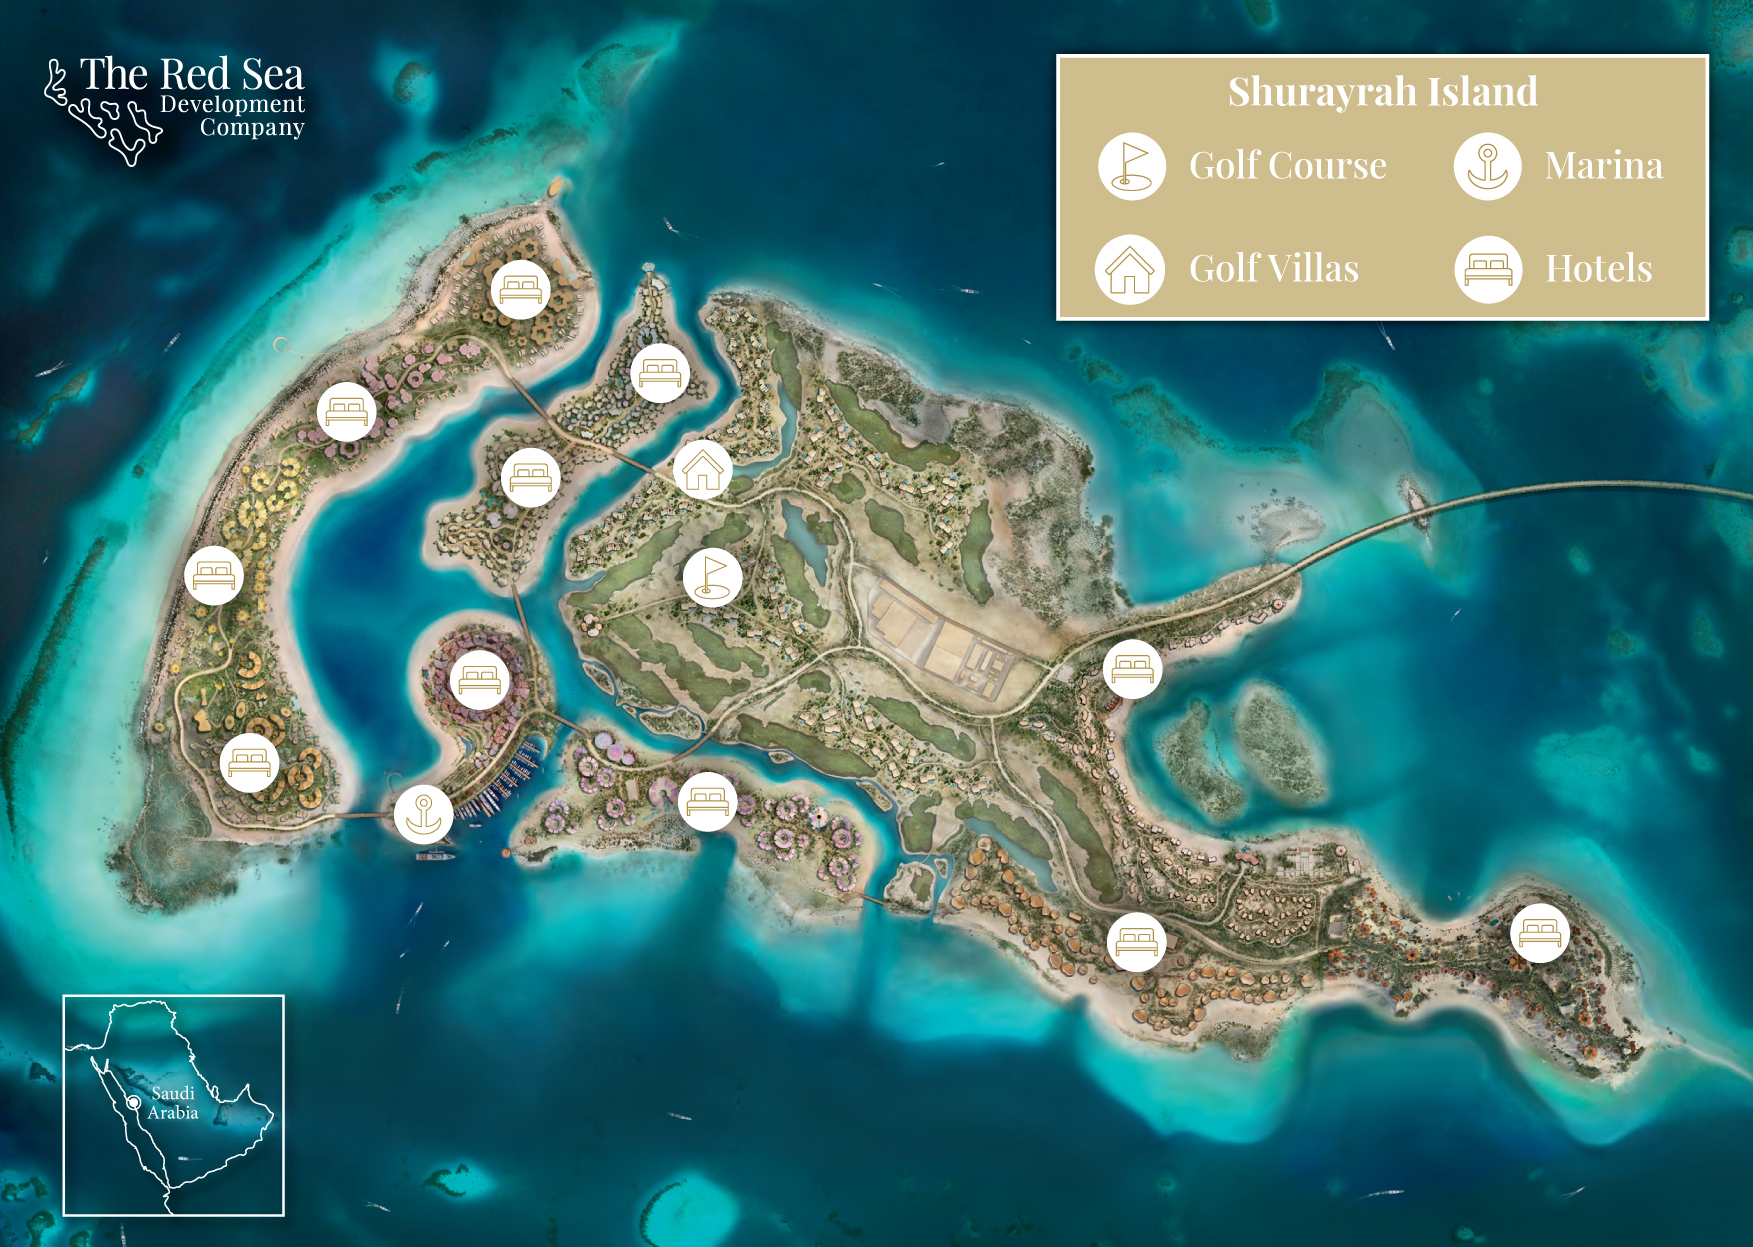 Red Sea Global on Twitter: "The 11 hotels our hub will be operated by some of the distinguished hotel brands in the world. The island's natural landscape will be